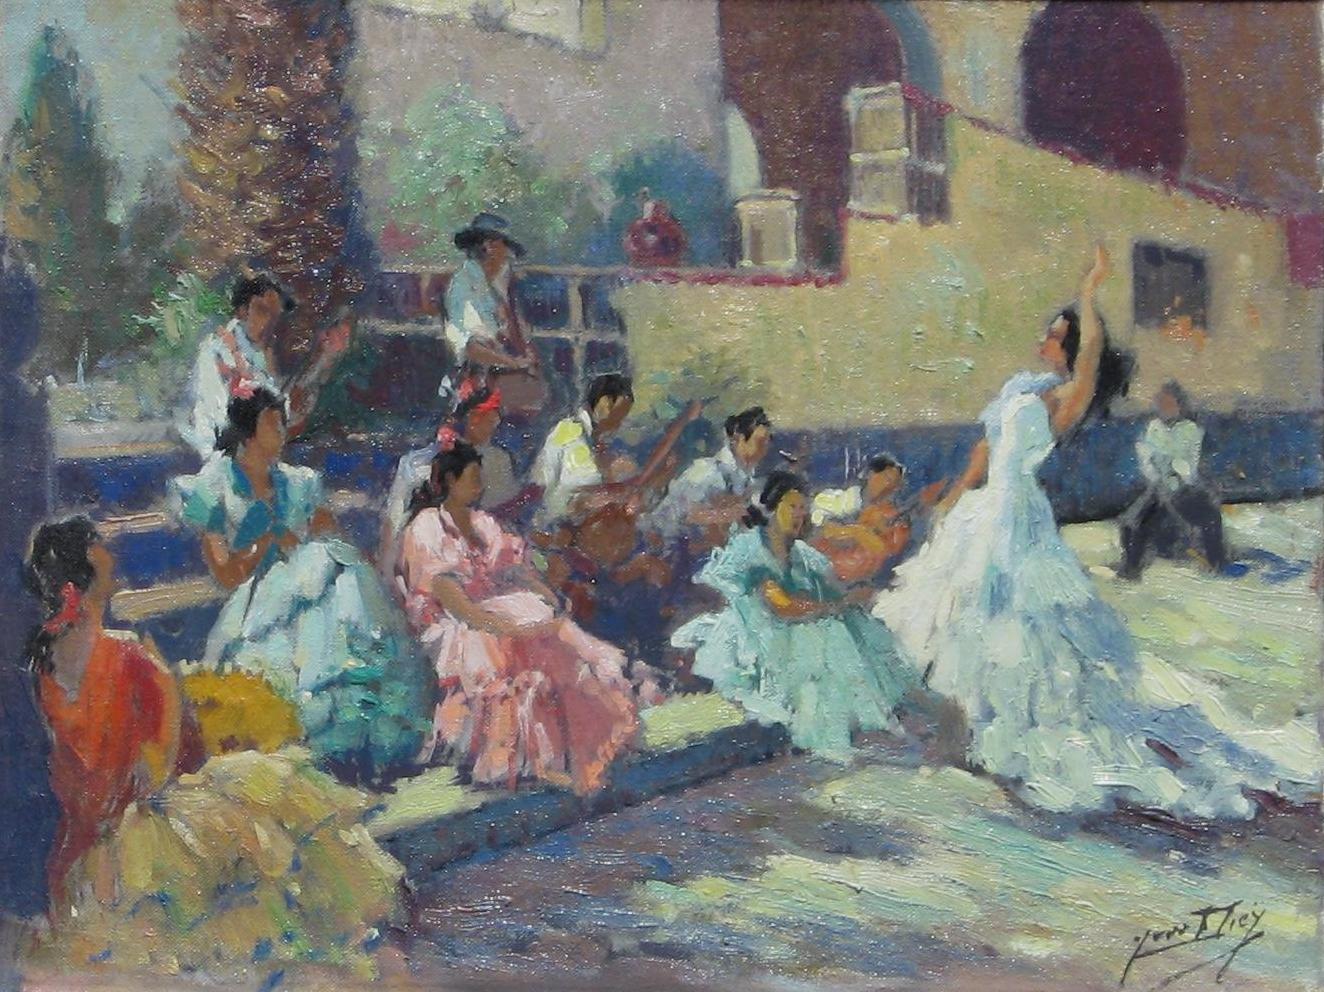 Original oil on canvas by French artist Yves Diey (1892-1984).  
Signed lower right. In excellent condition. 
The subject features Flamenco dancers.
Measures: 11